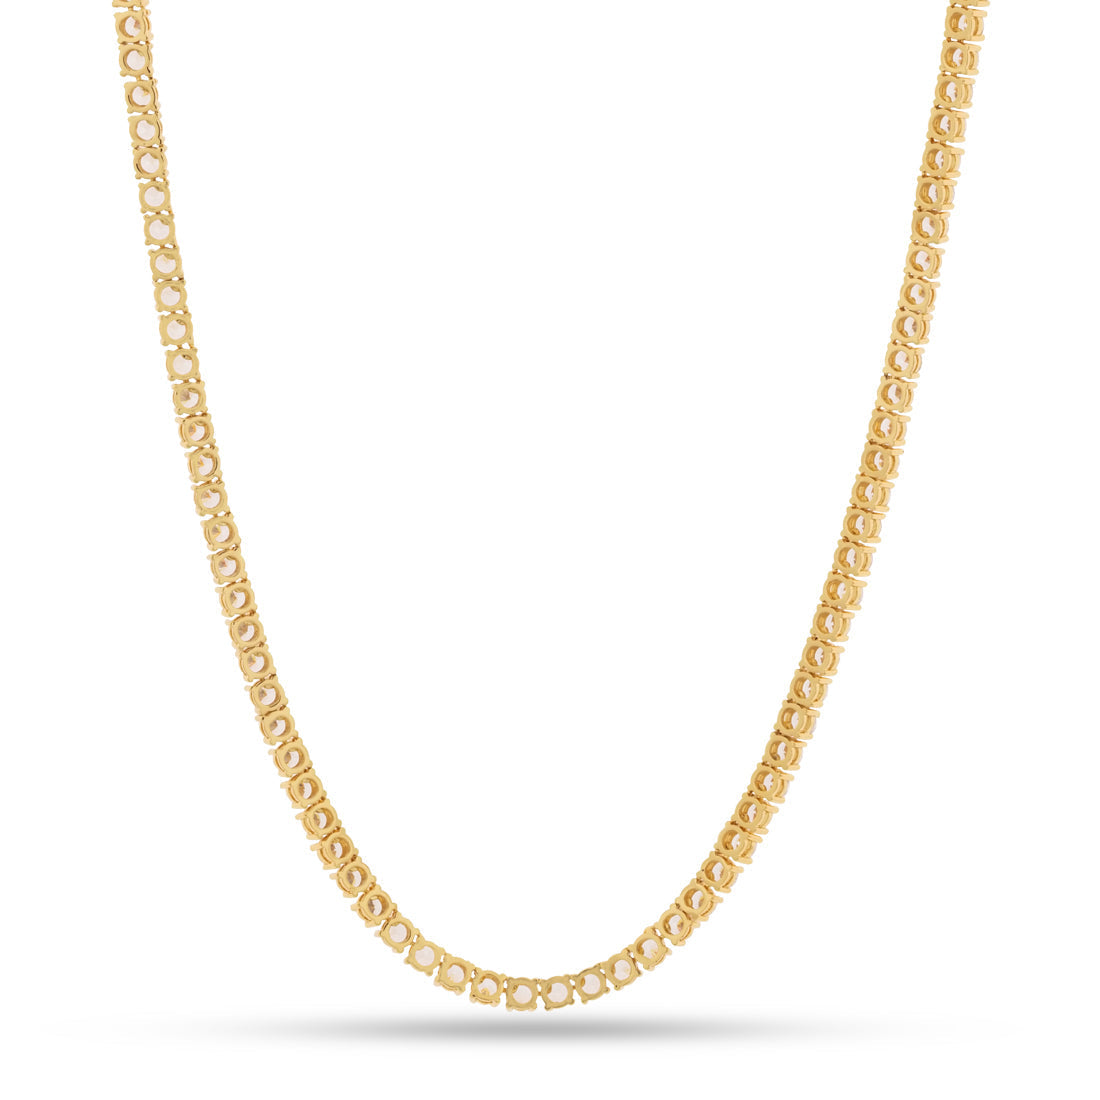 Mens Hip Hop Men Tennis Diamond Necklace Necklace Gold Tone Zircon, 1 Row,  18 30 Inch Length, 3mm X 5mm From Xjl666, $52.22 | DHgate.Com